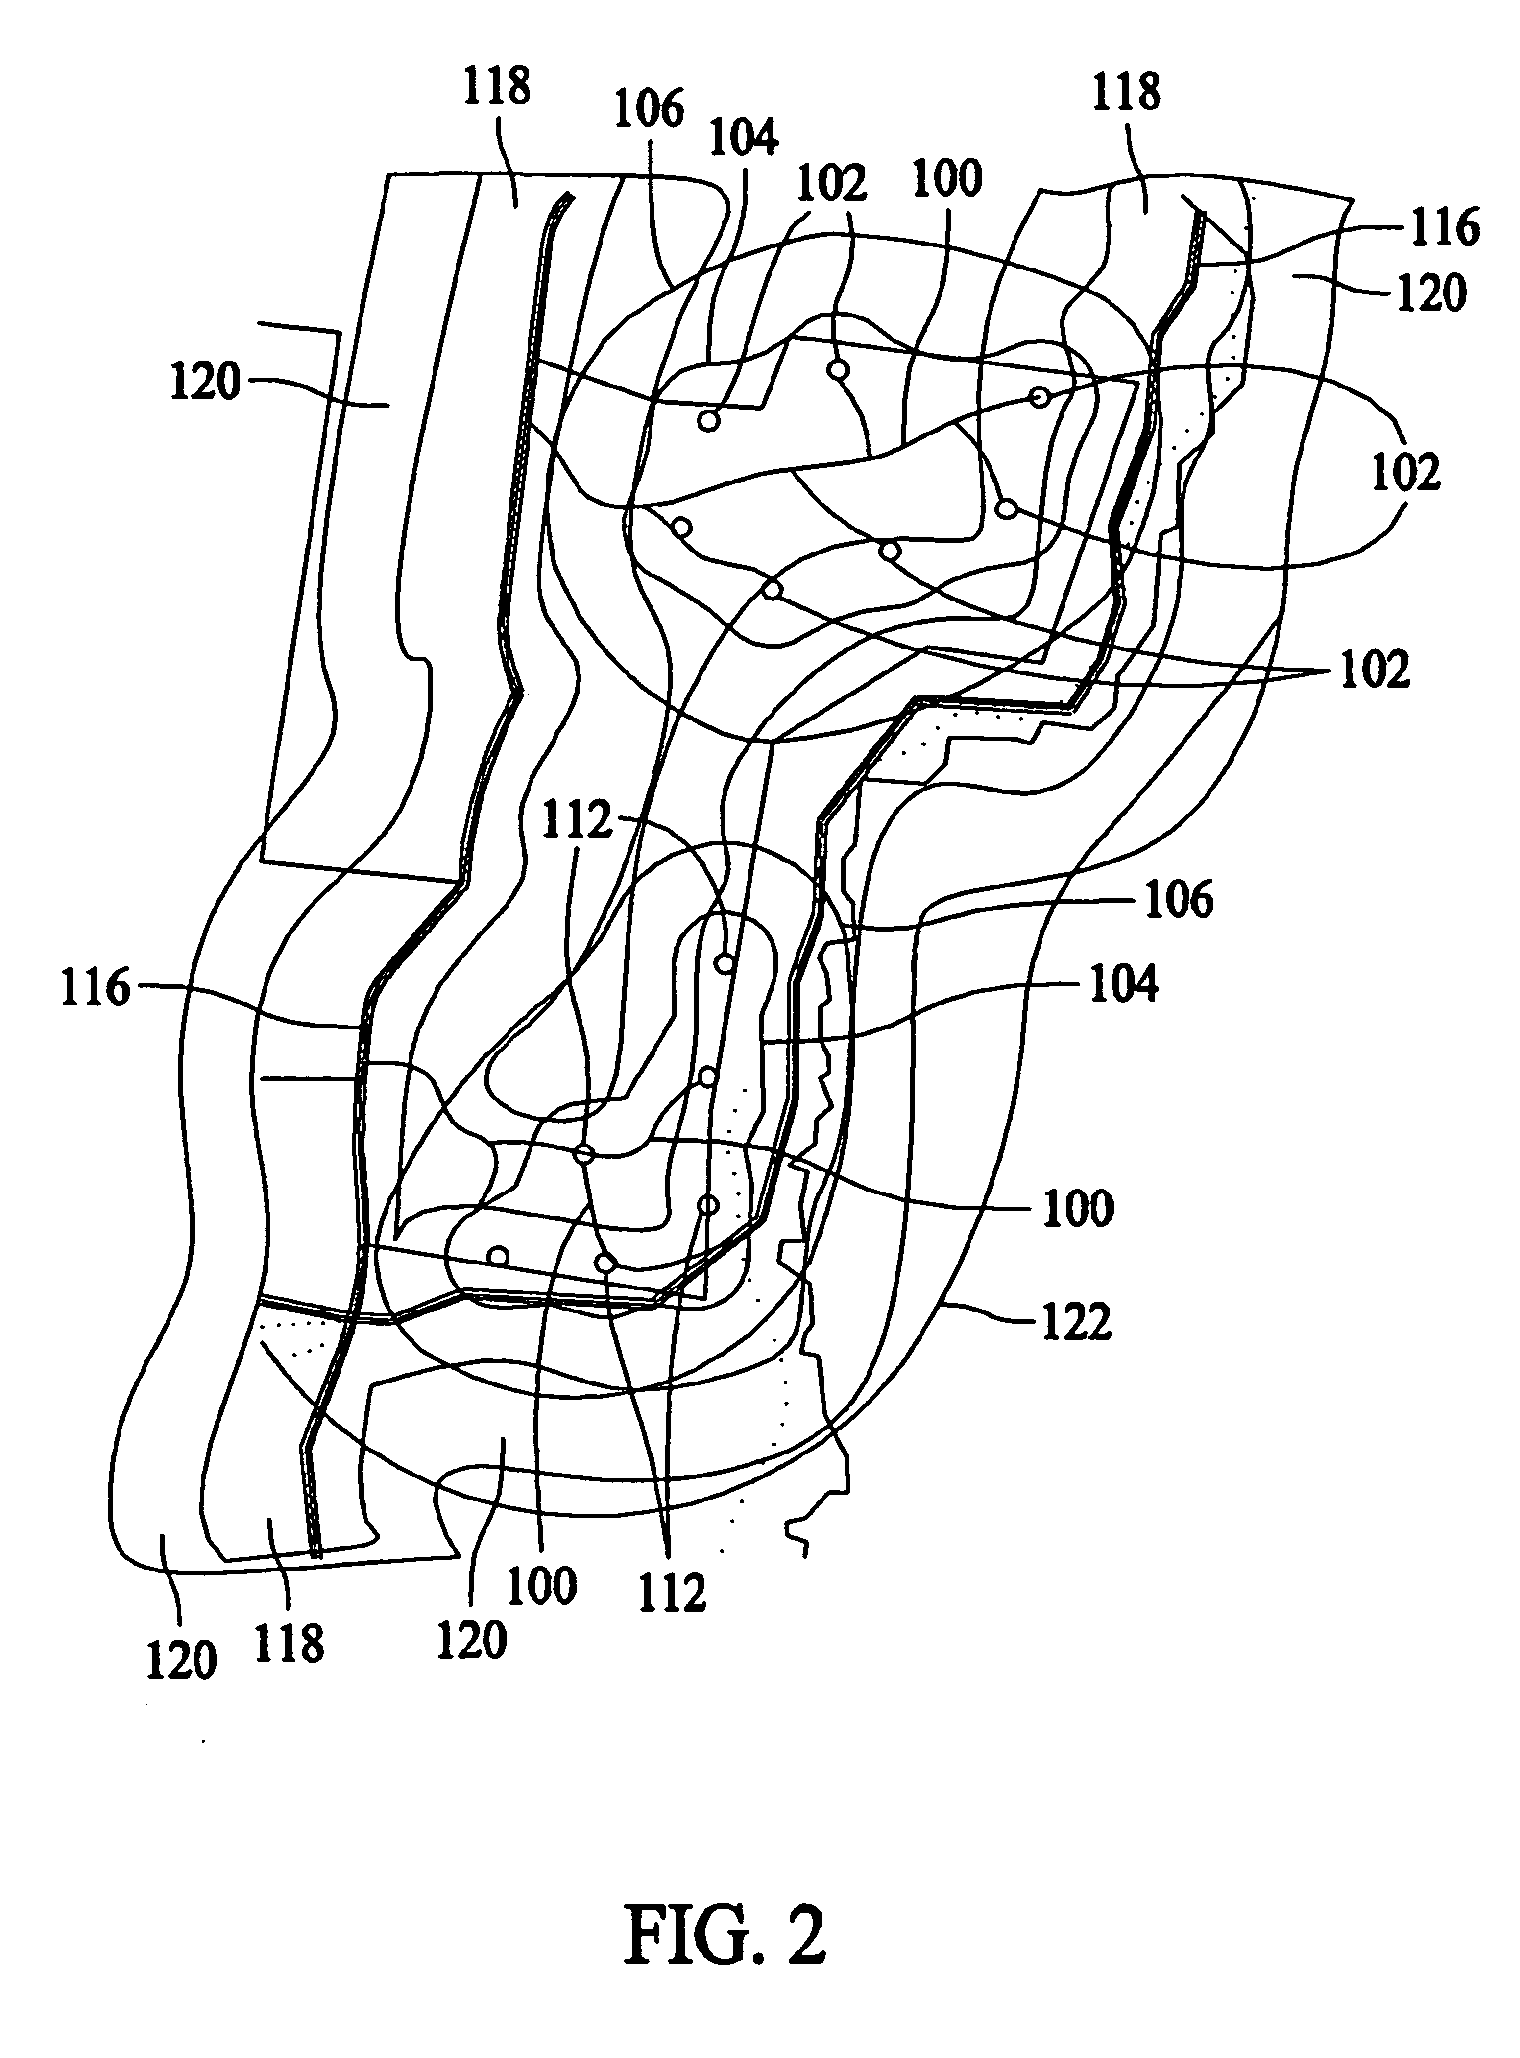 Method and apparatus for producing wind energy with reduced wind turbine noise